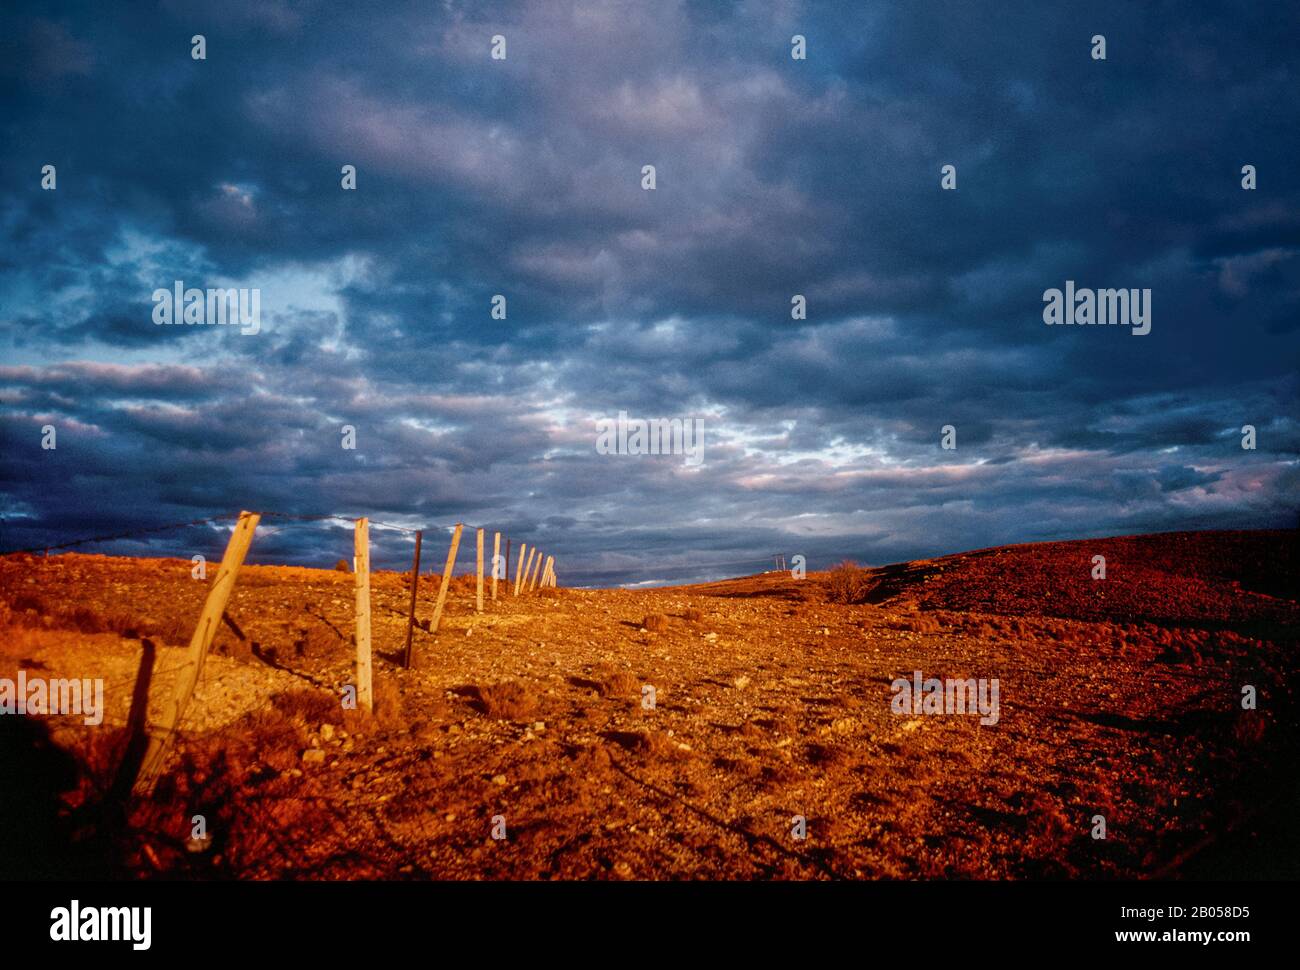 Dark gloomy skies of approaching storm over Southern Tablelands  New South Wales, Australia Stock Photo